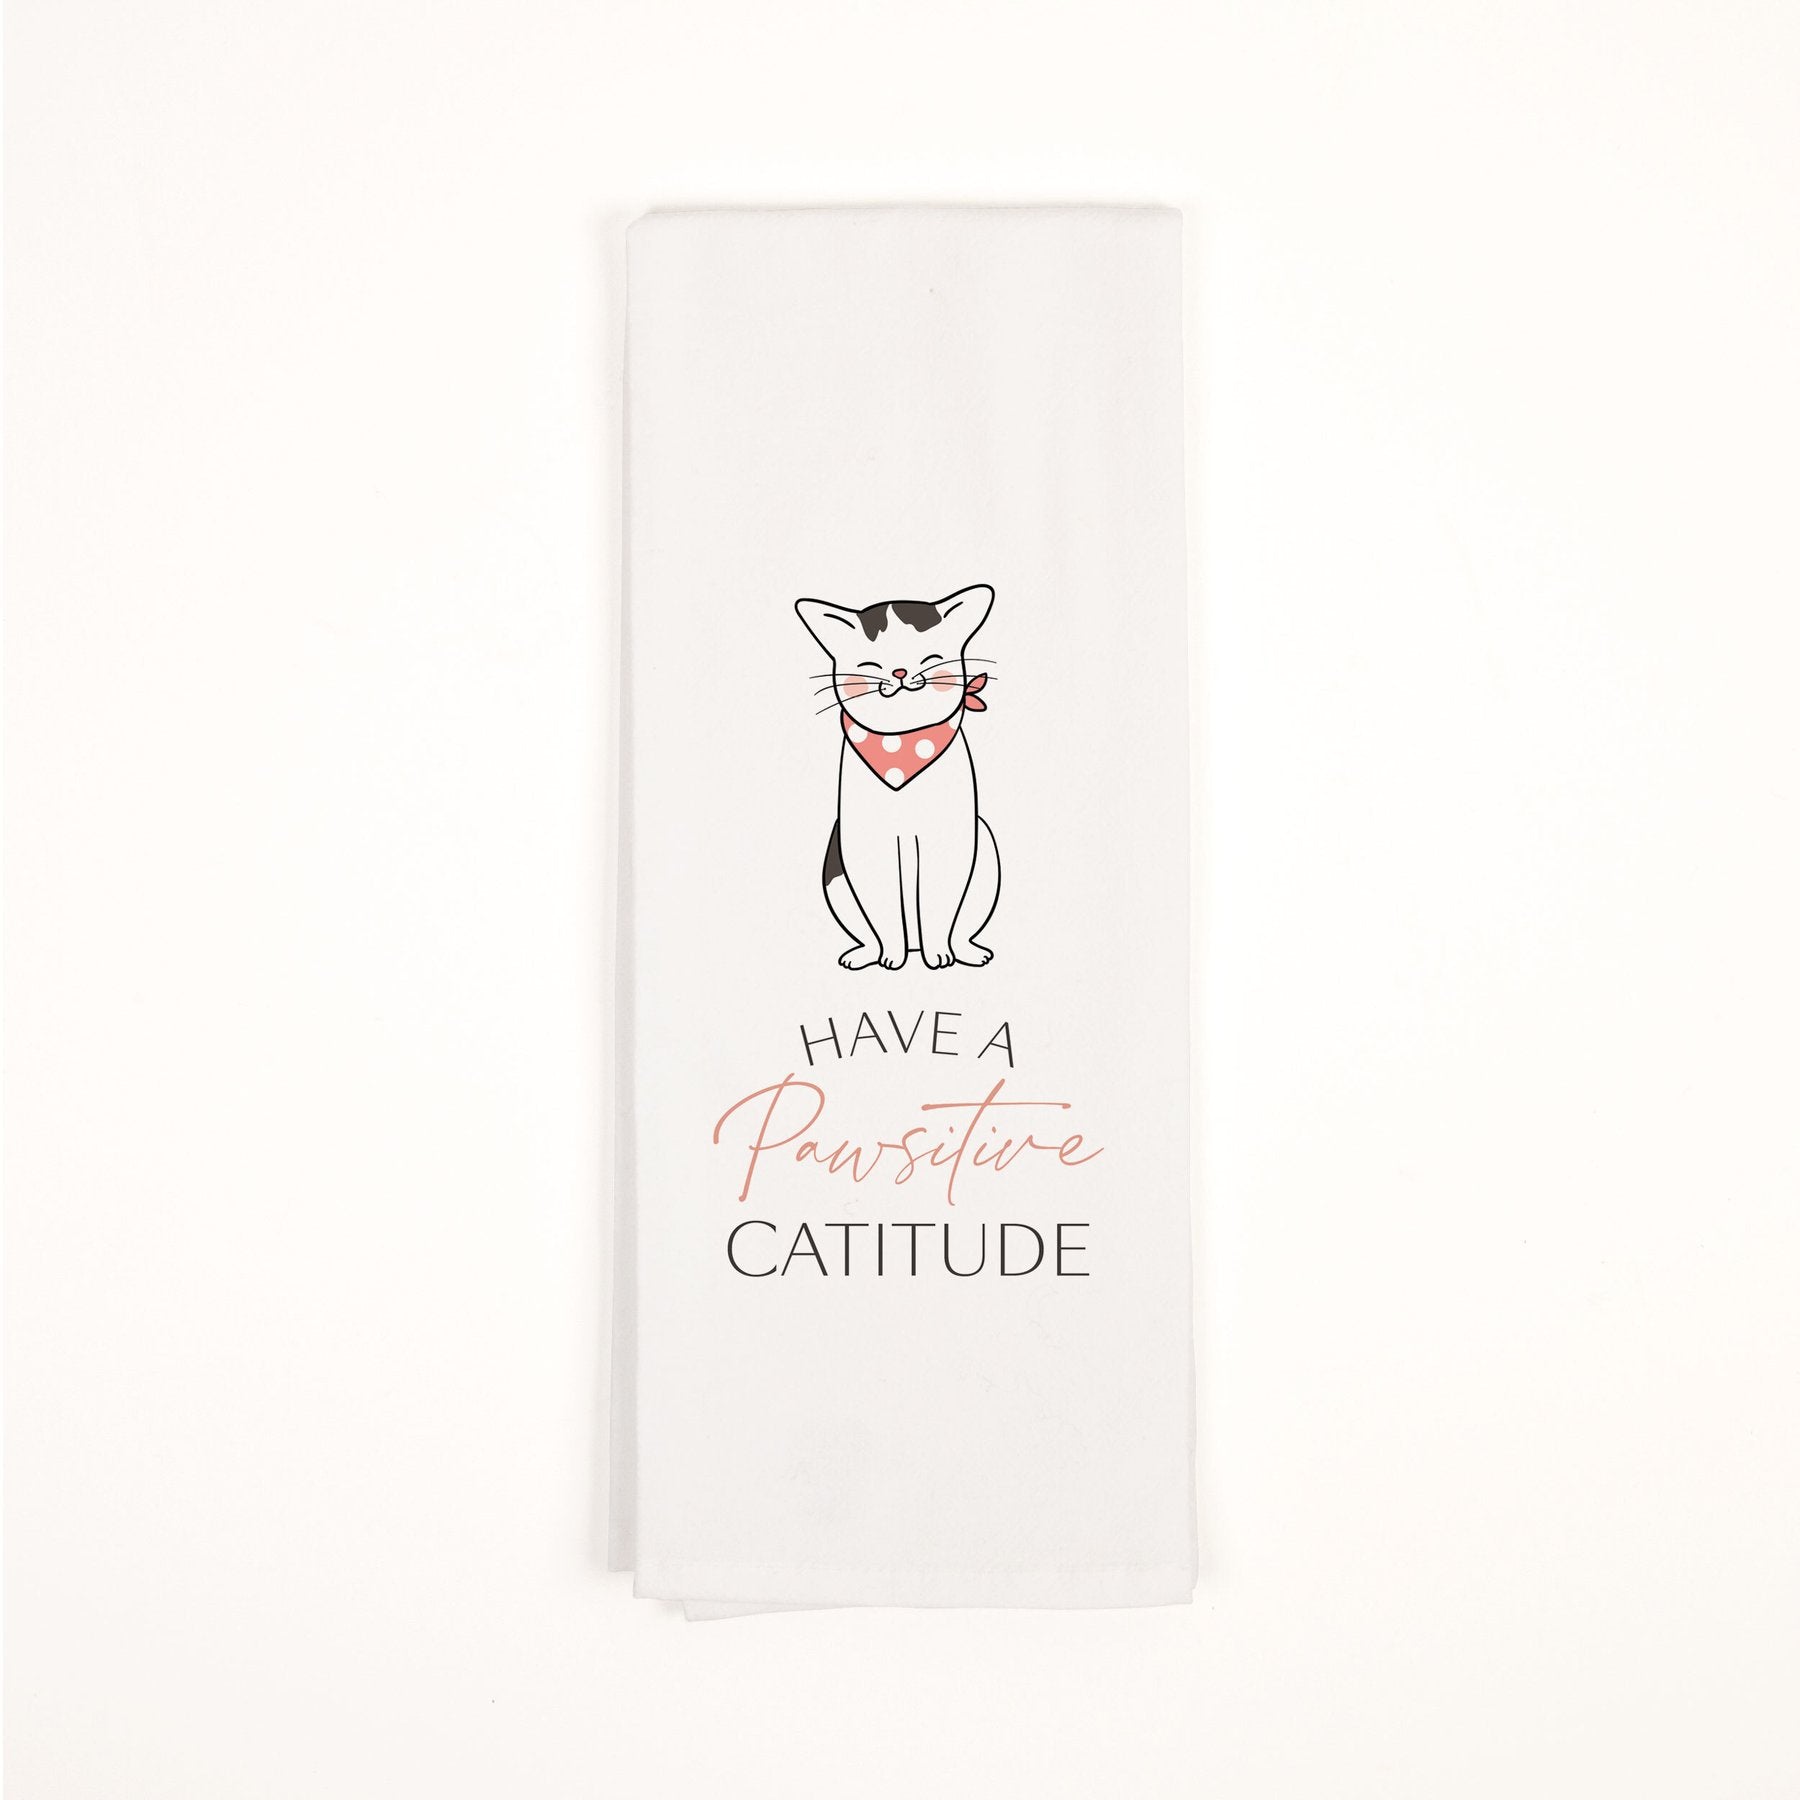 Have a Paws-itive Catitude Tea Towel